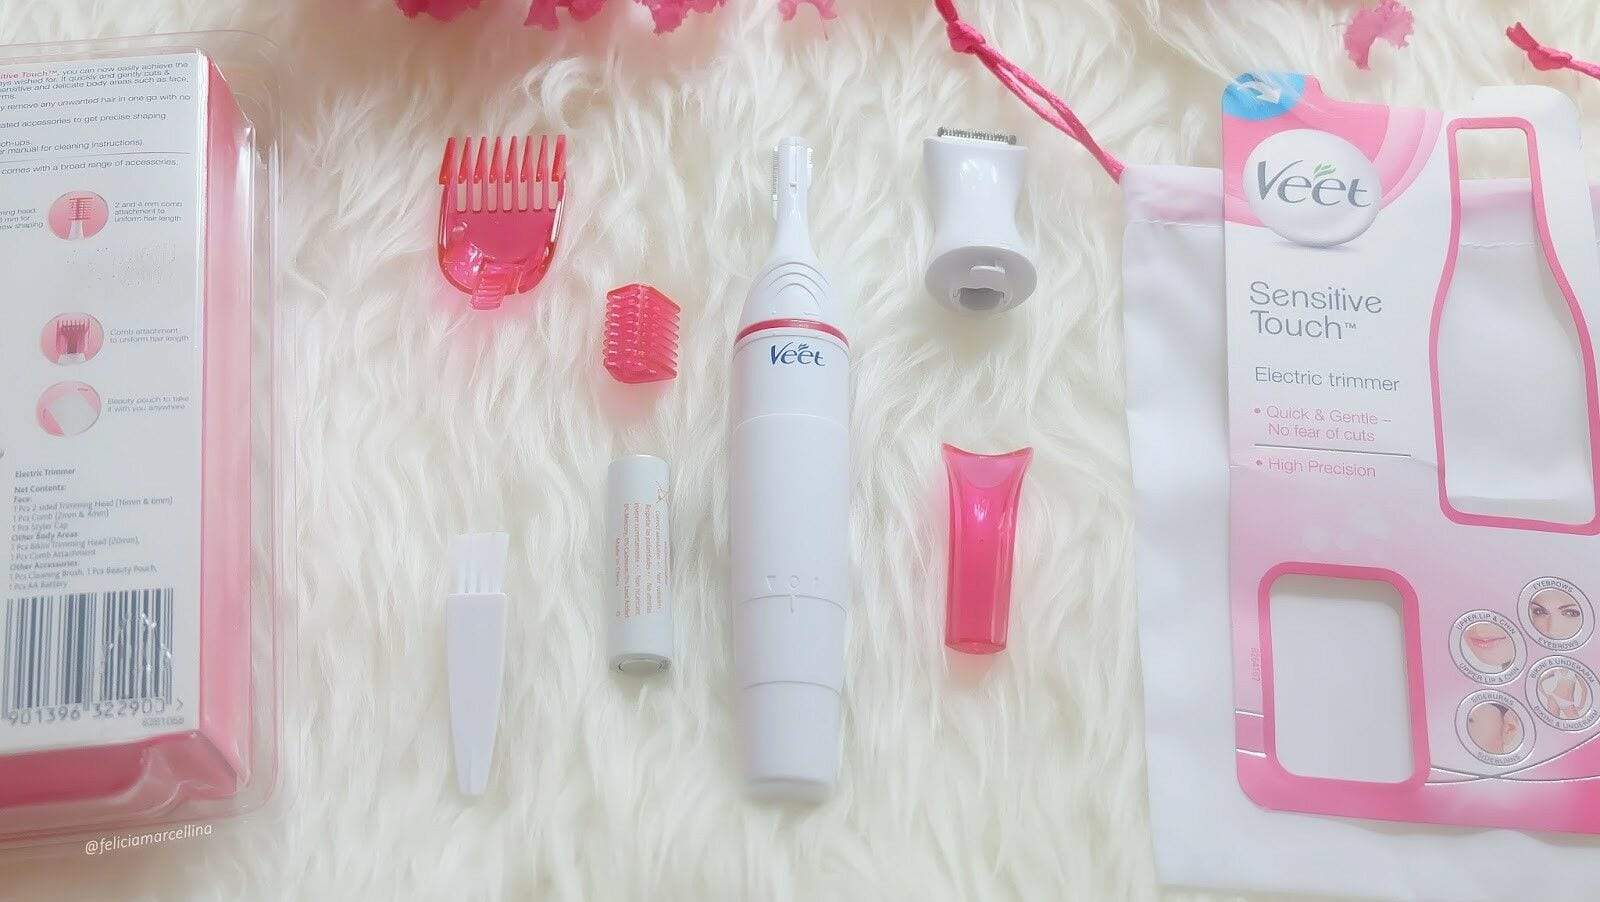 veet trimmer cell operated In Pakistan